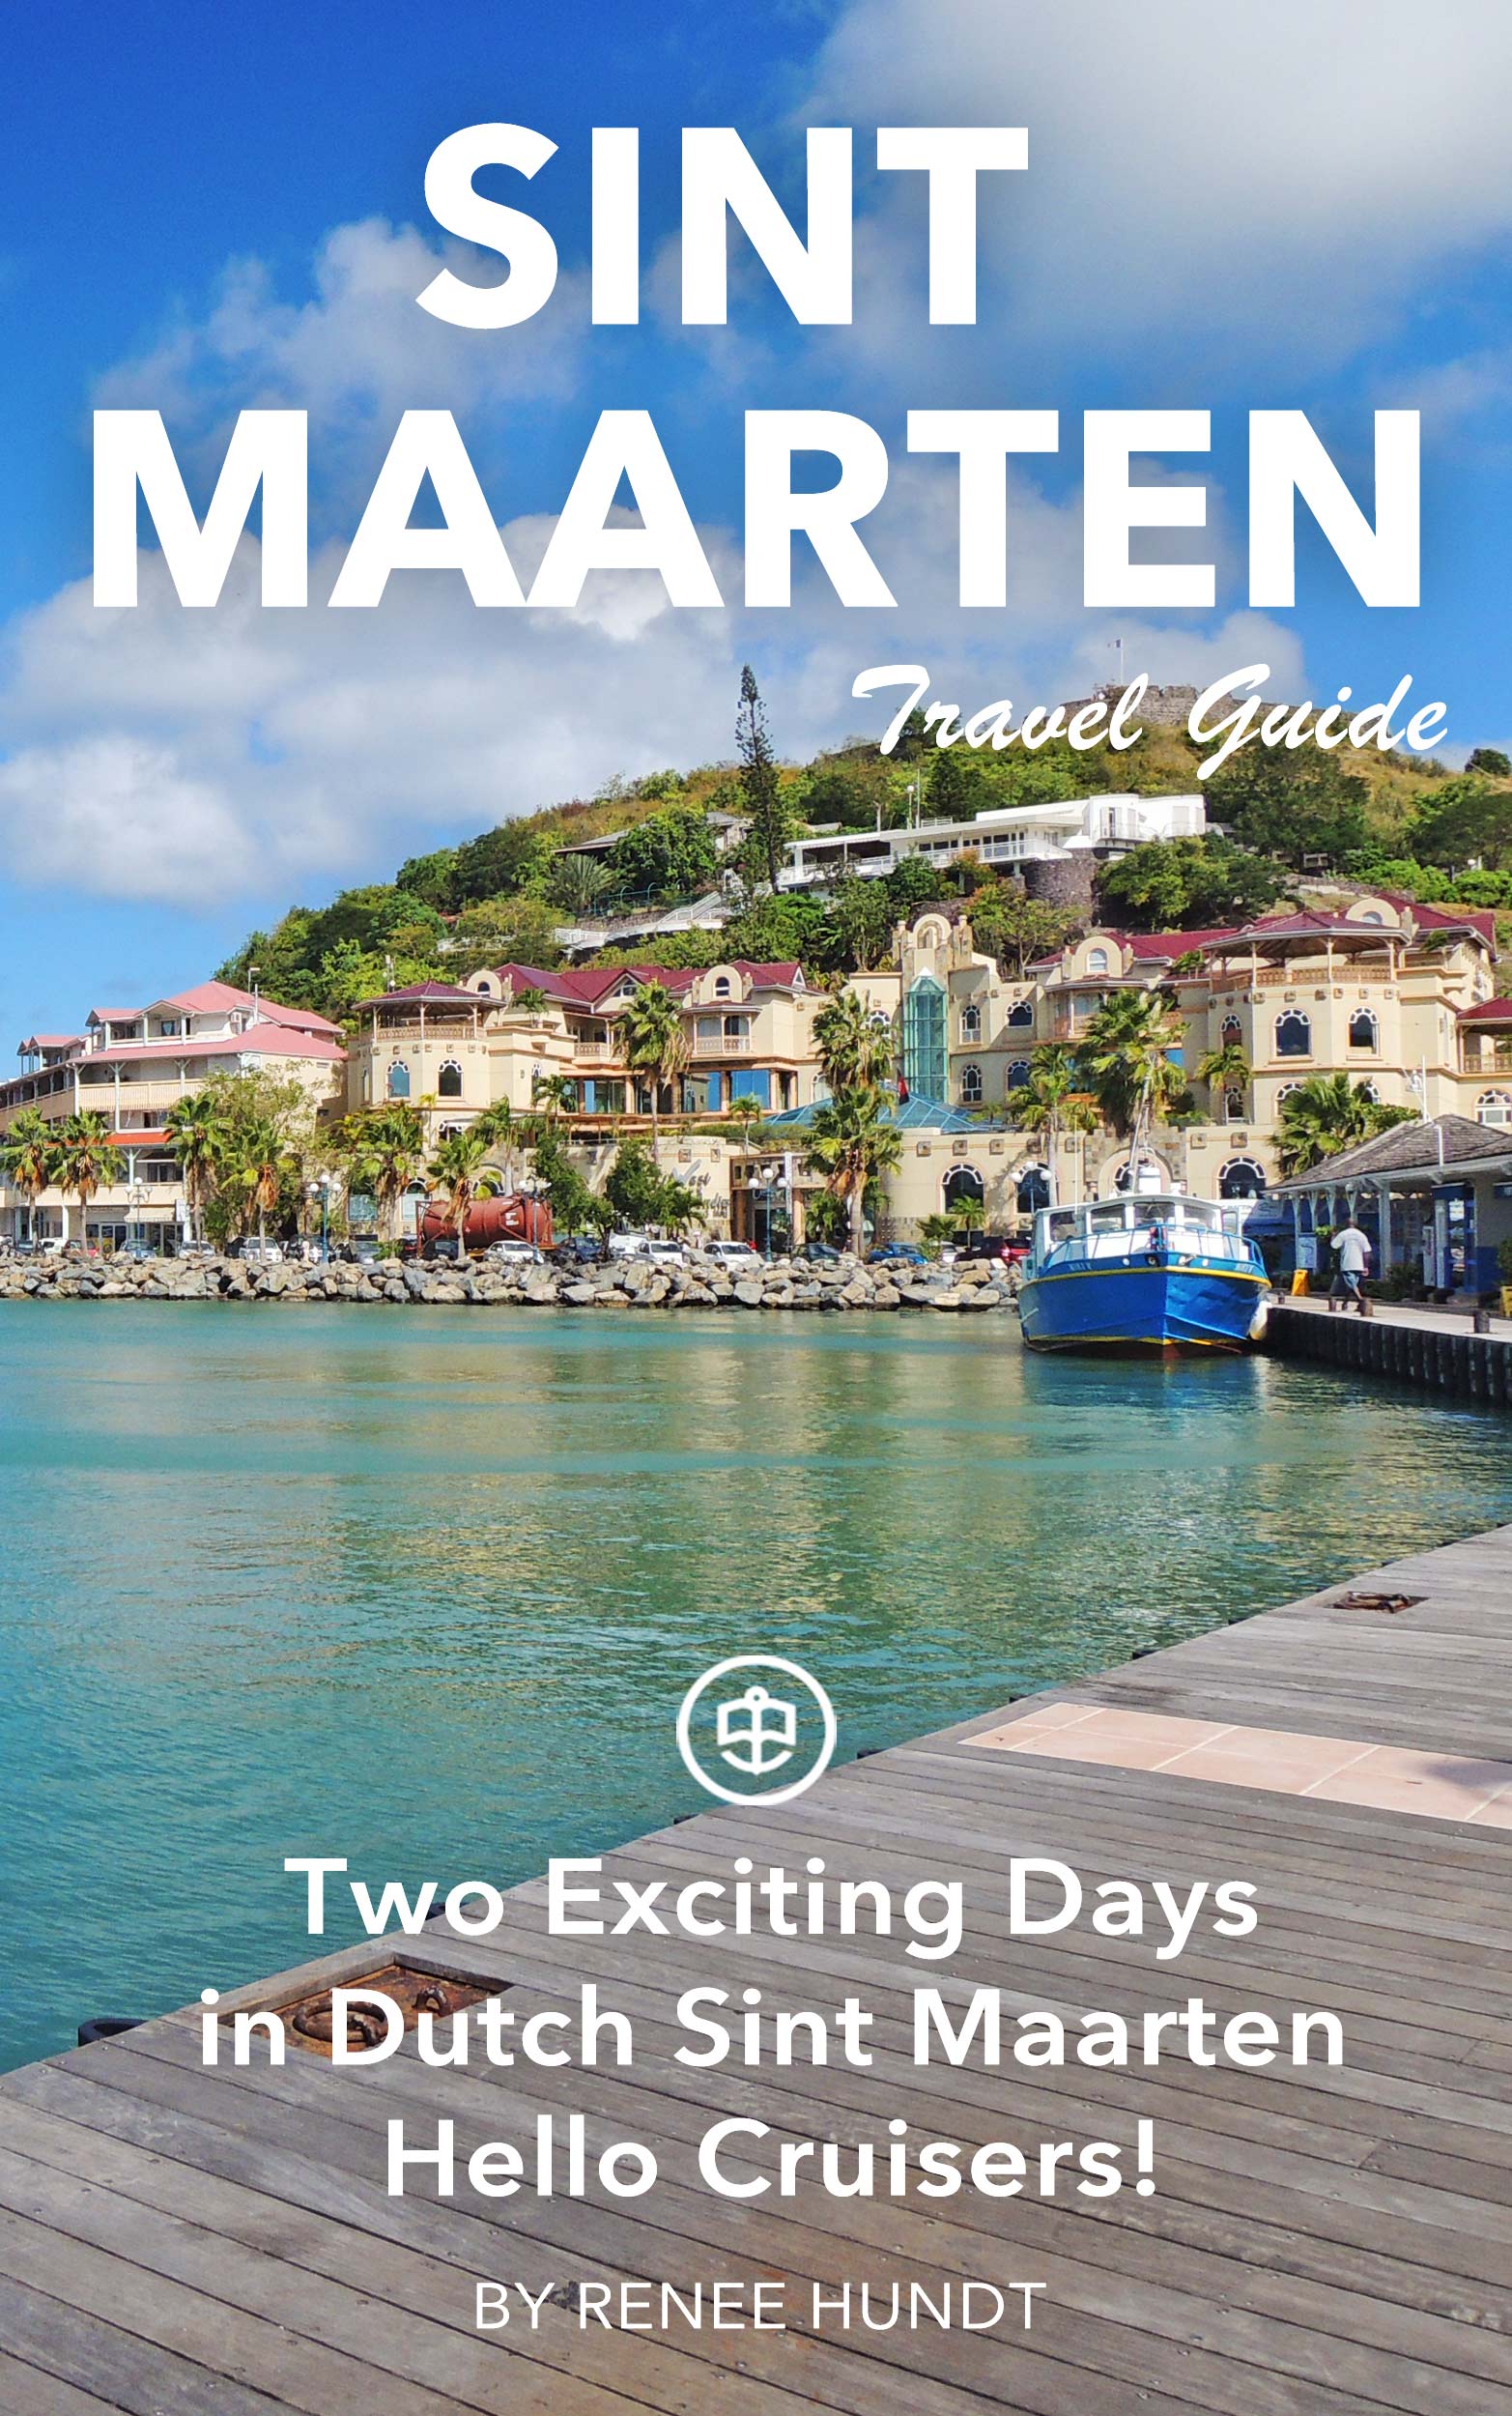 Two Exciting Days in Dutch Sint Maarten - Hello Cruisers!